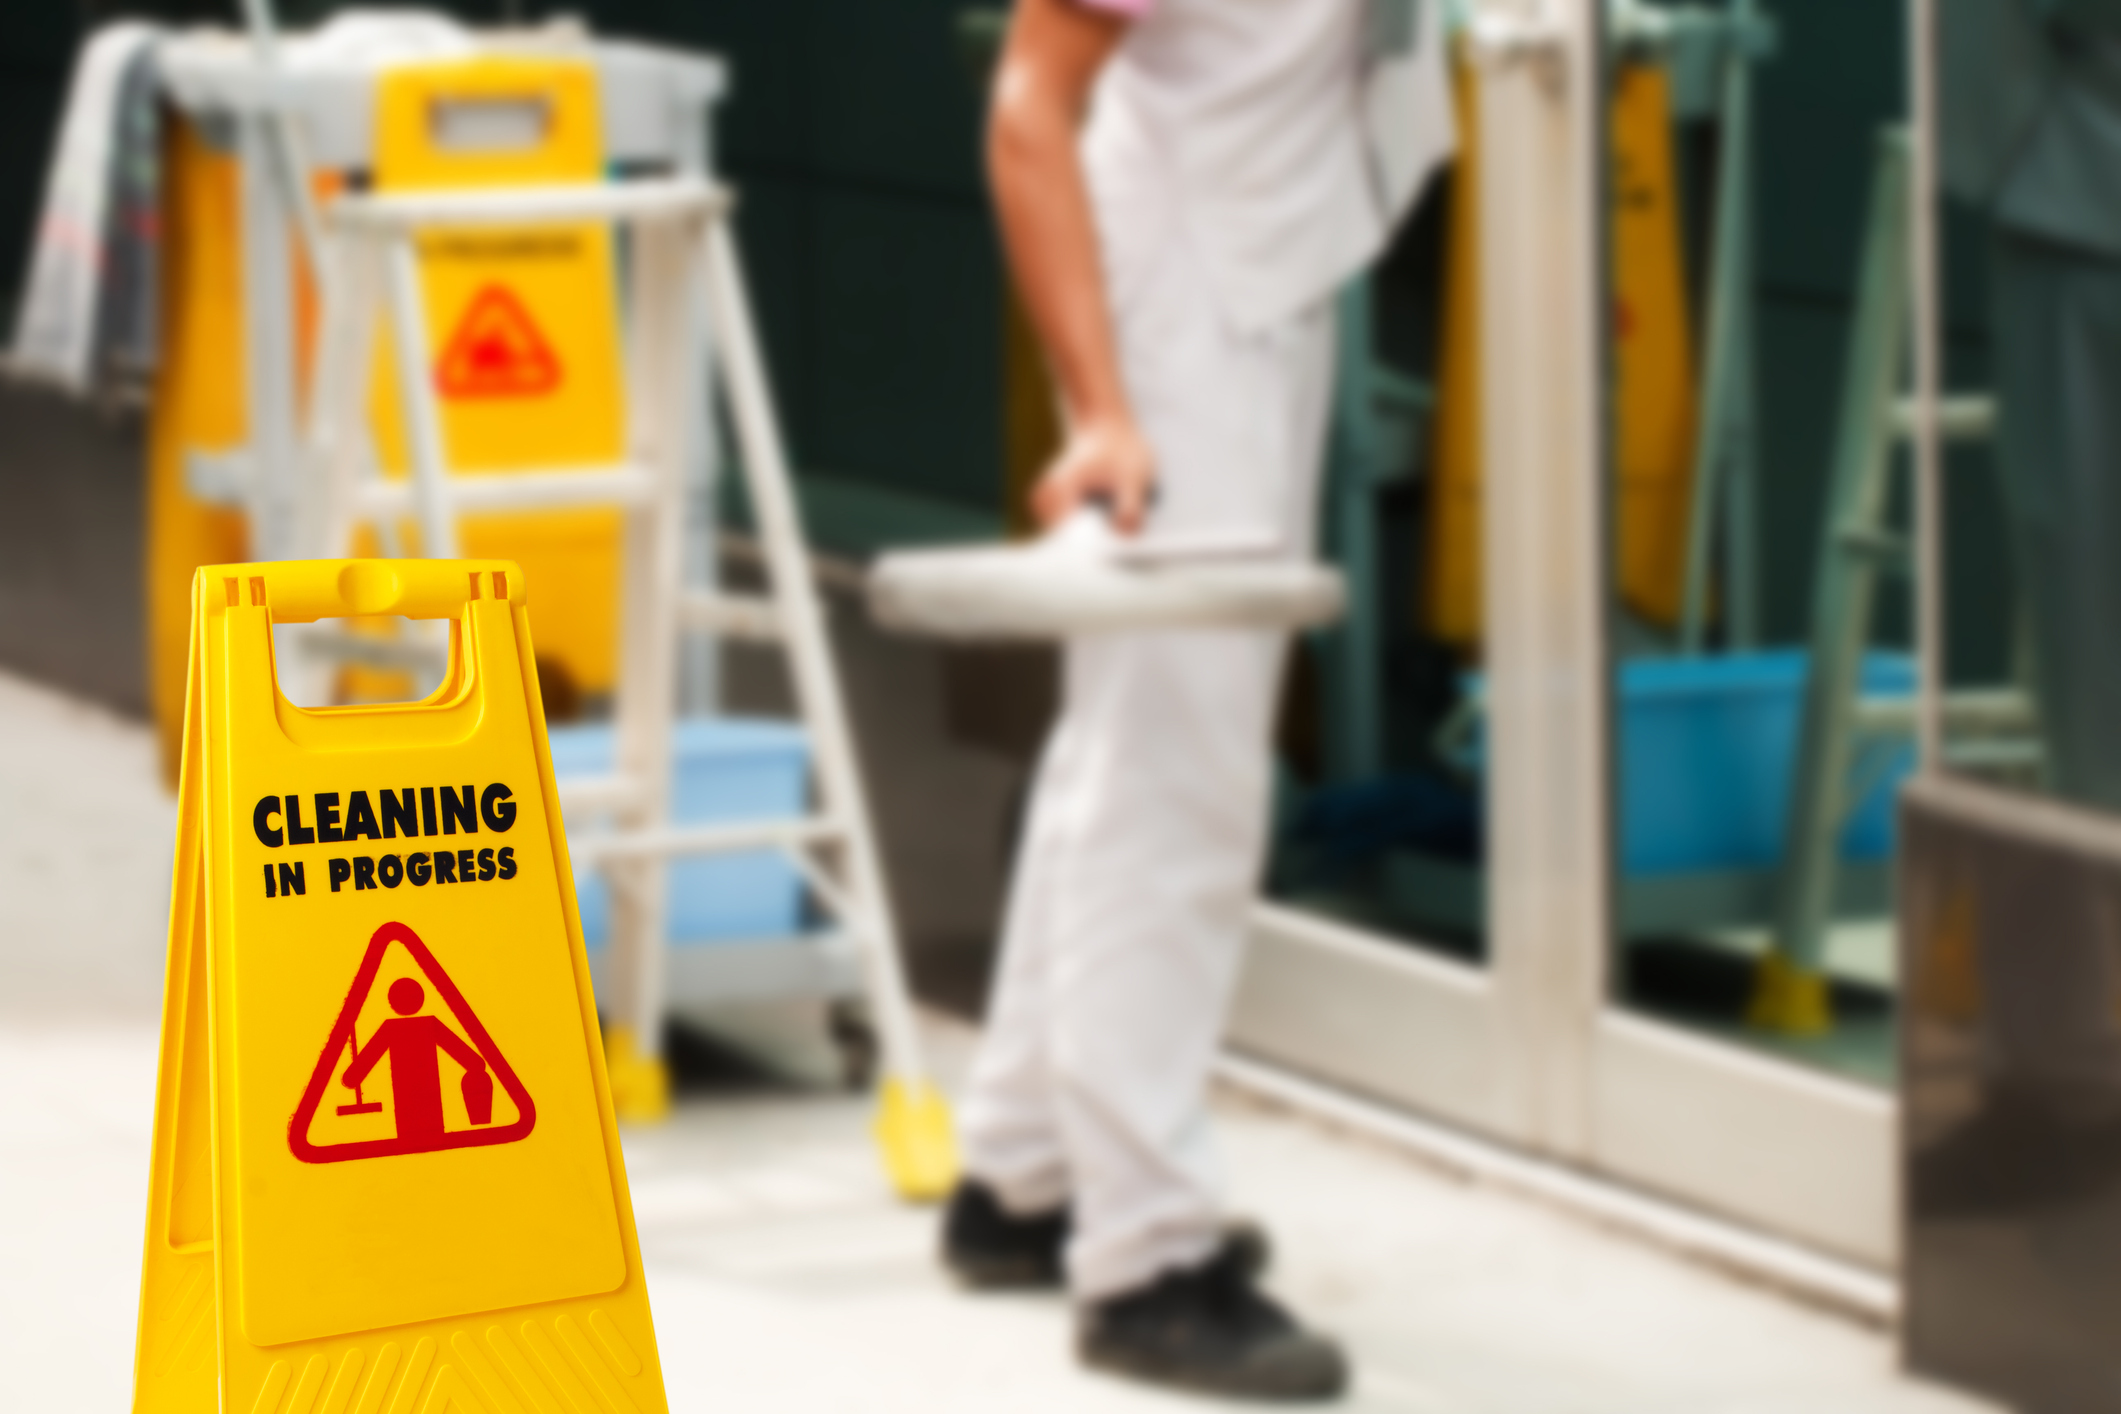 The warning signs cleaning in progress in the building and the janitorial mop bucket car parked and the maid working in the back. To remind people to walk safely.